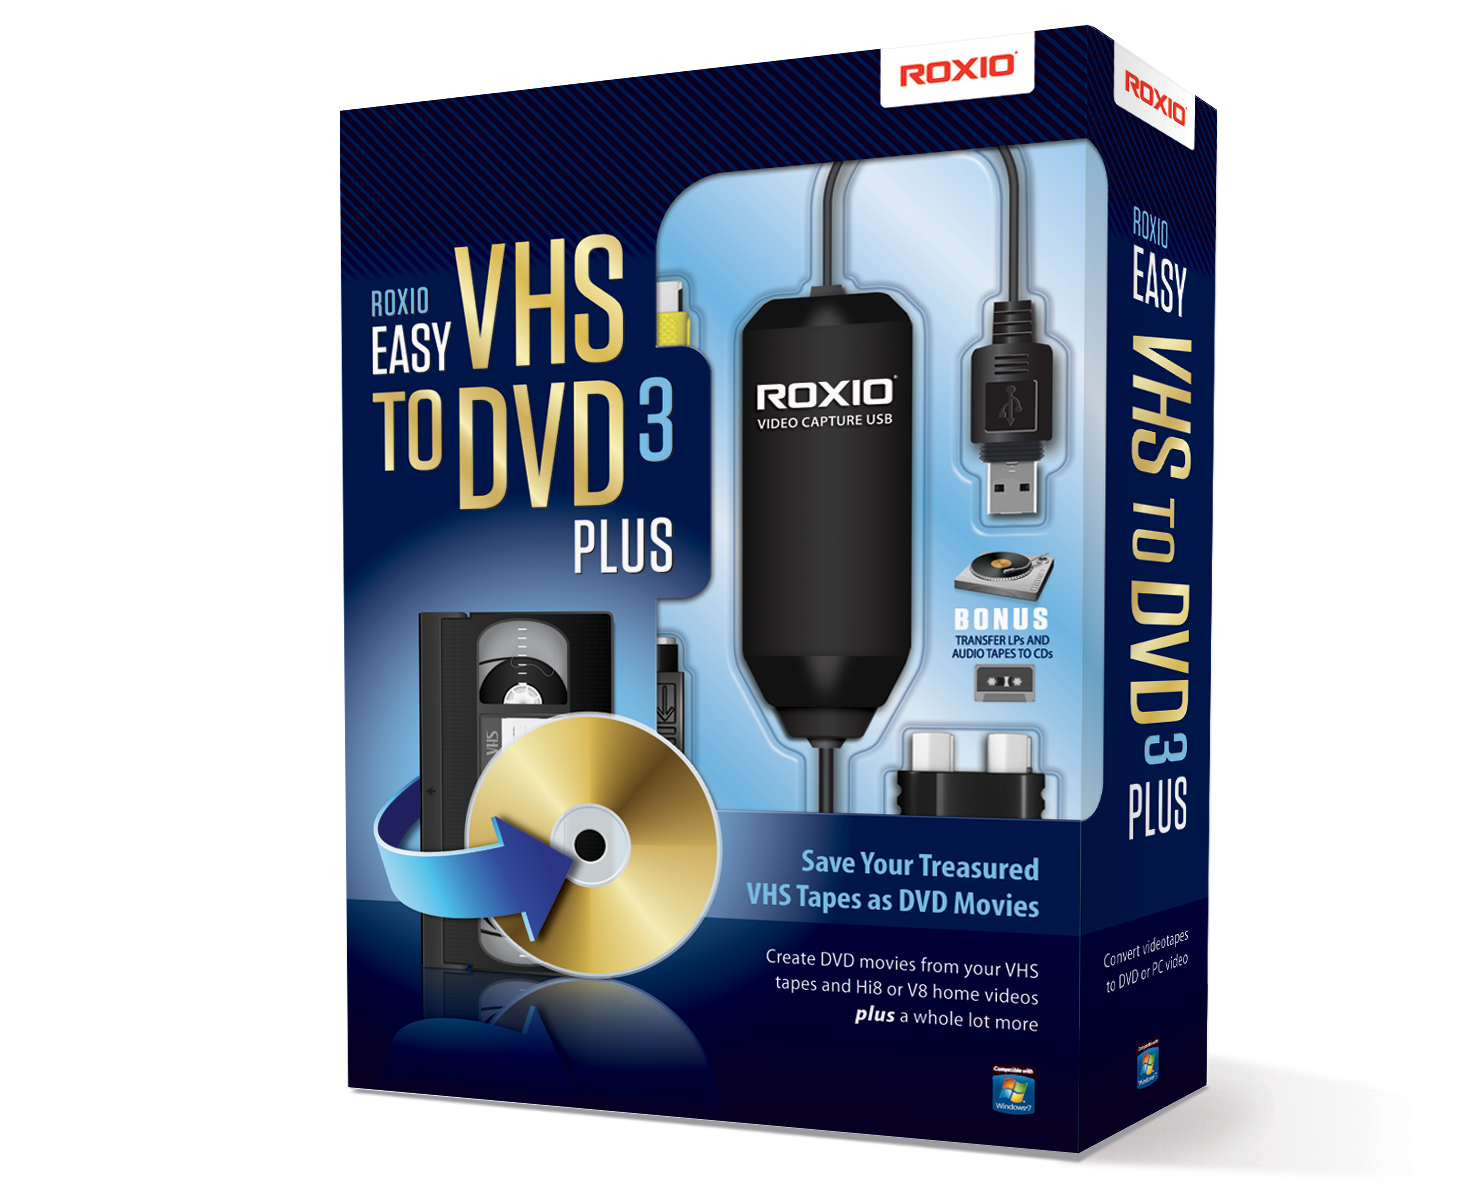 download roxio easy vhs to dvd 3 plus